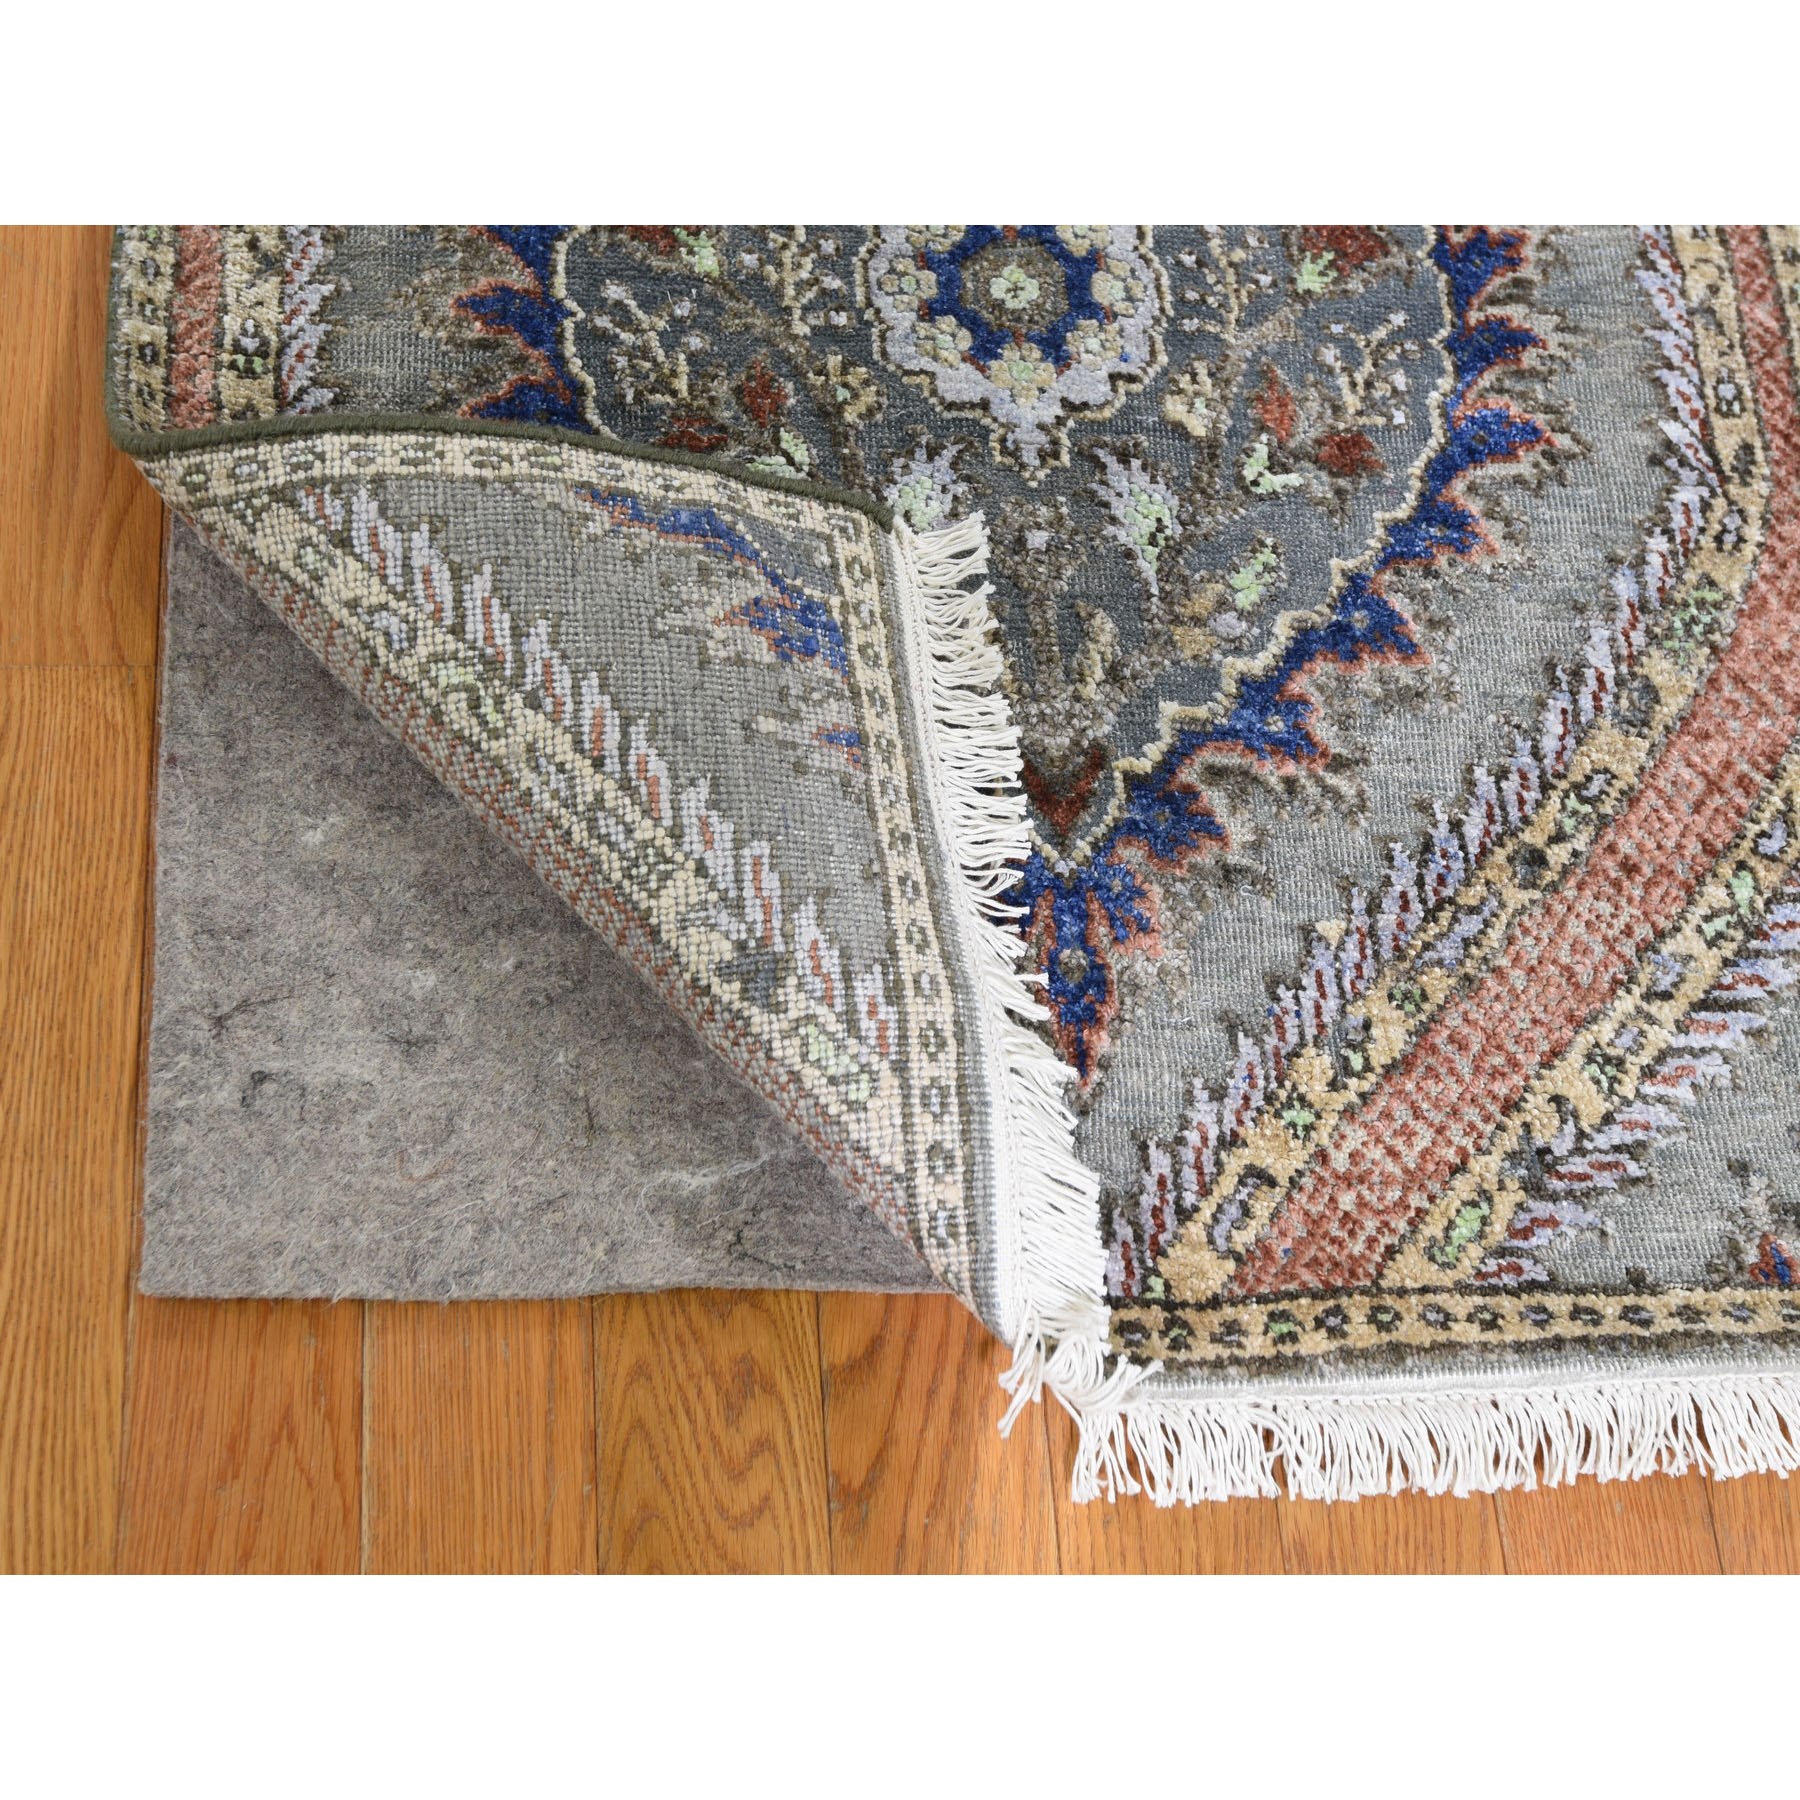 2-6 x10- Mughal Design Pure Silk With Textured Wool Runner Hand Knotted Oriental Rug 